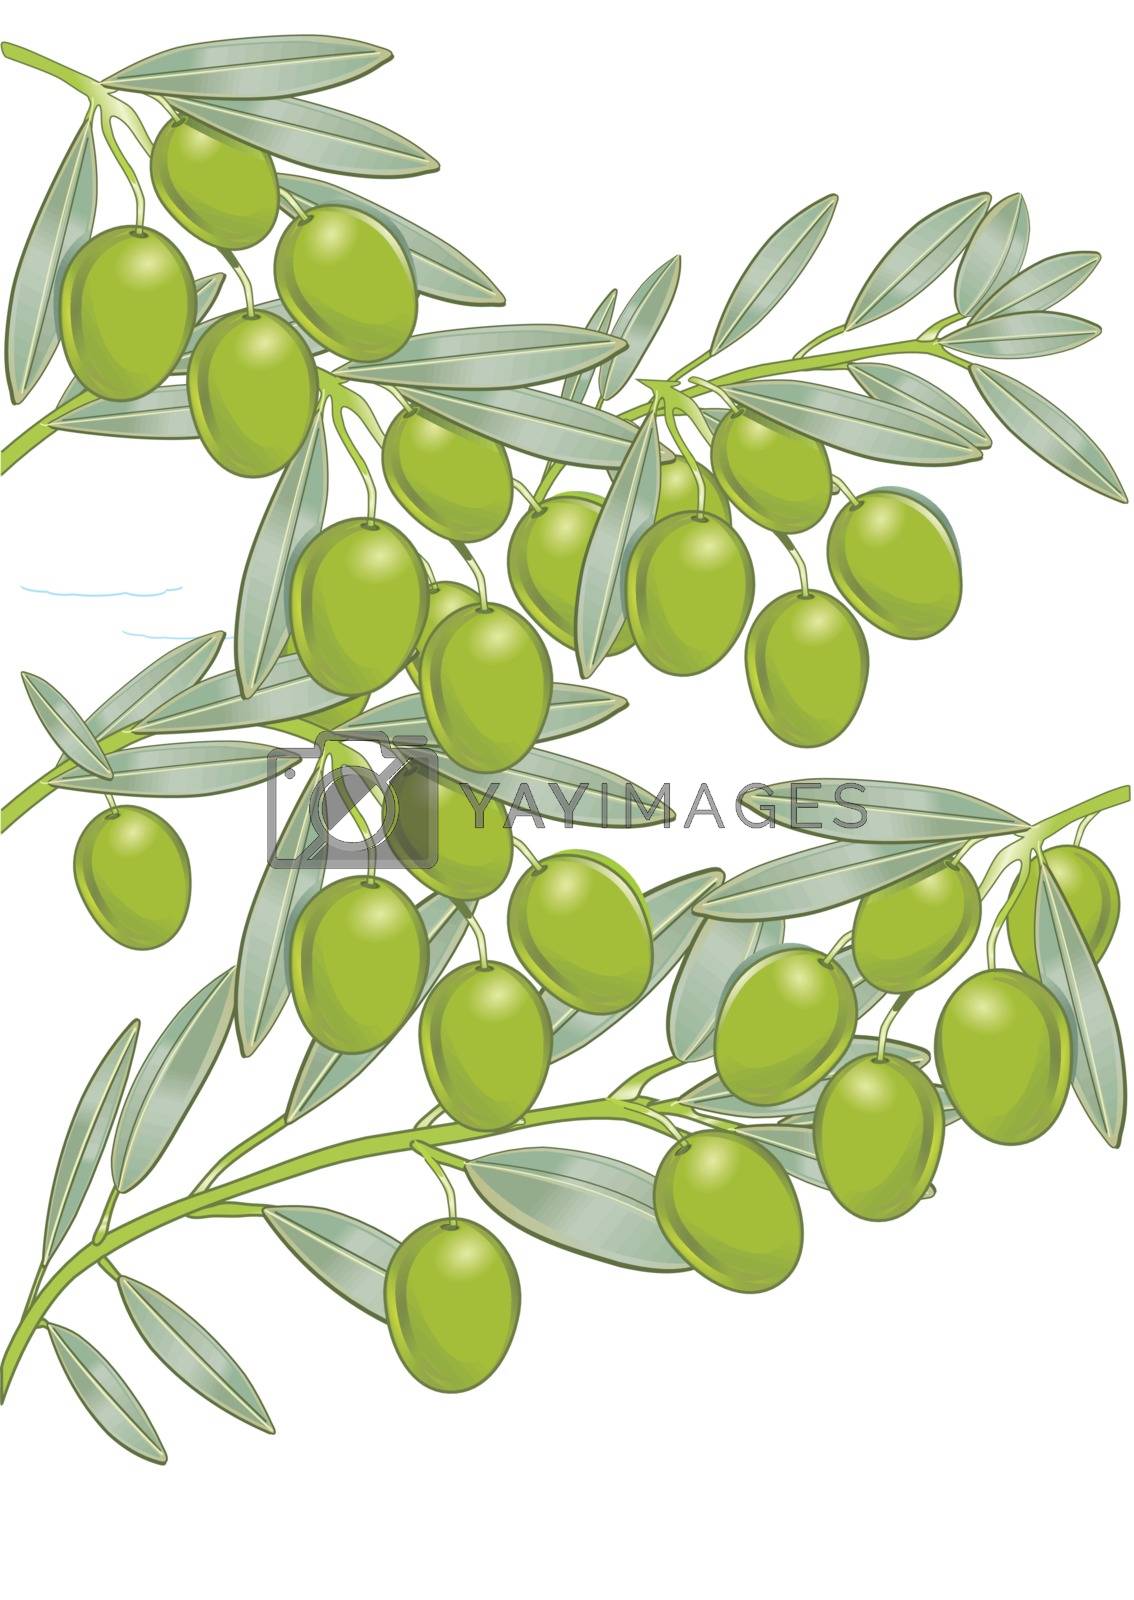 Royalty free image of Olives on the tree by scusi